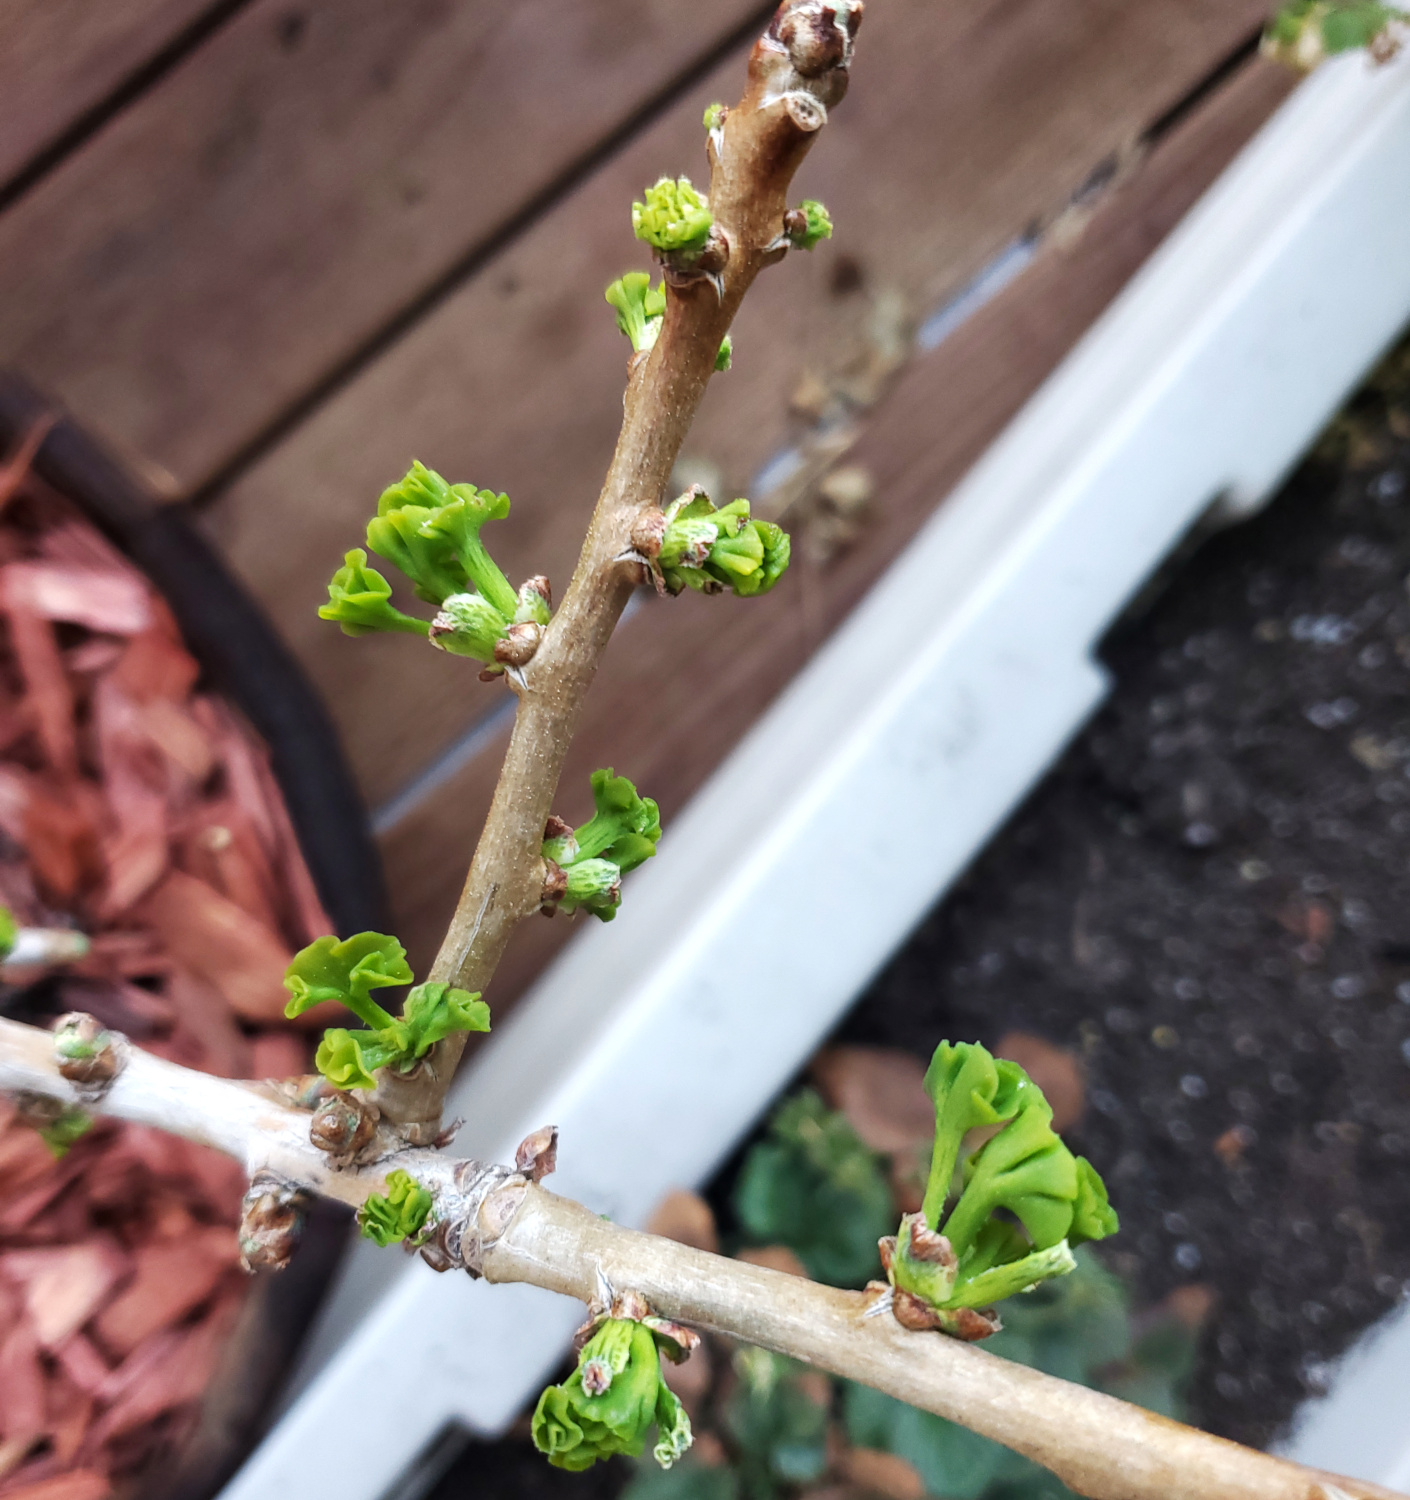 The Ginkgo is forming bursts of new leaves as Spring gets underway